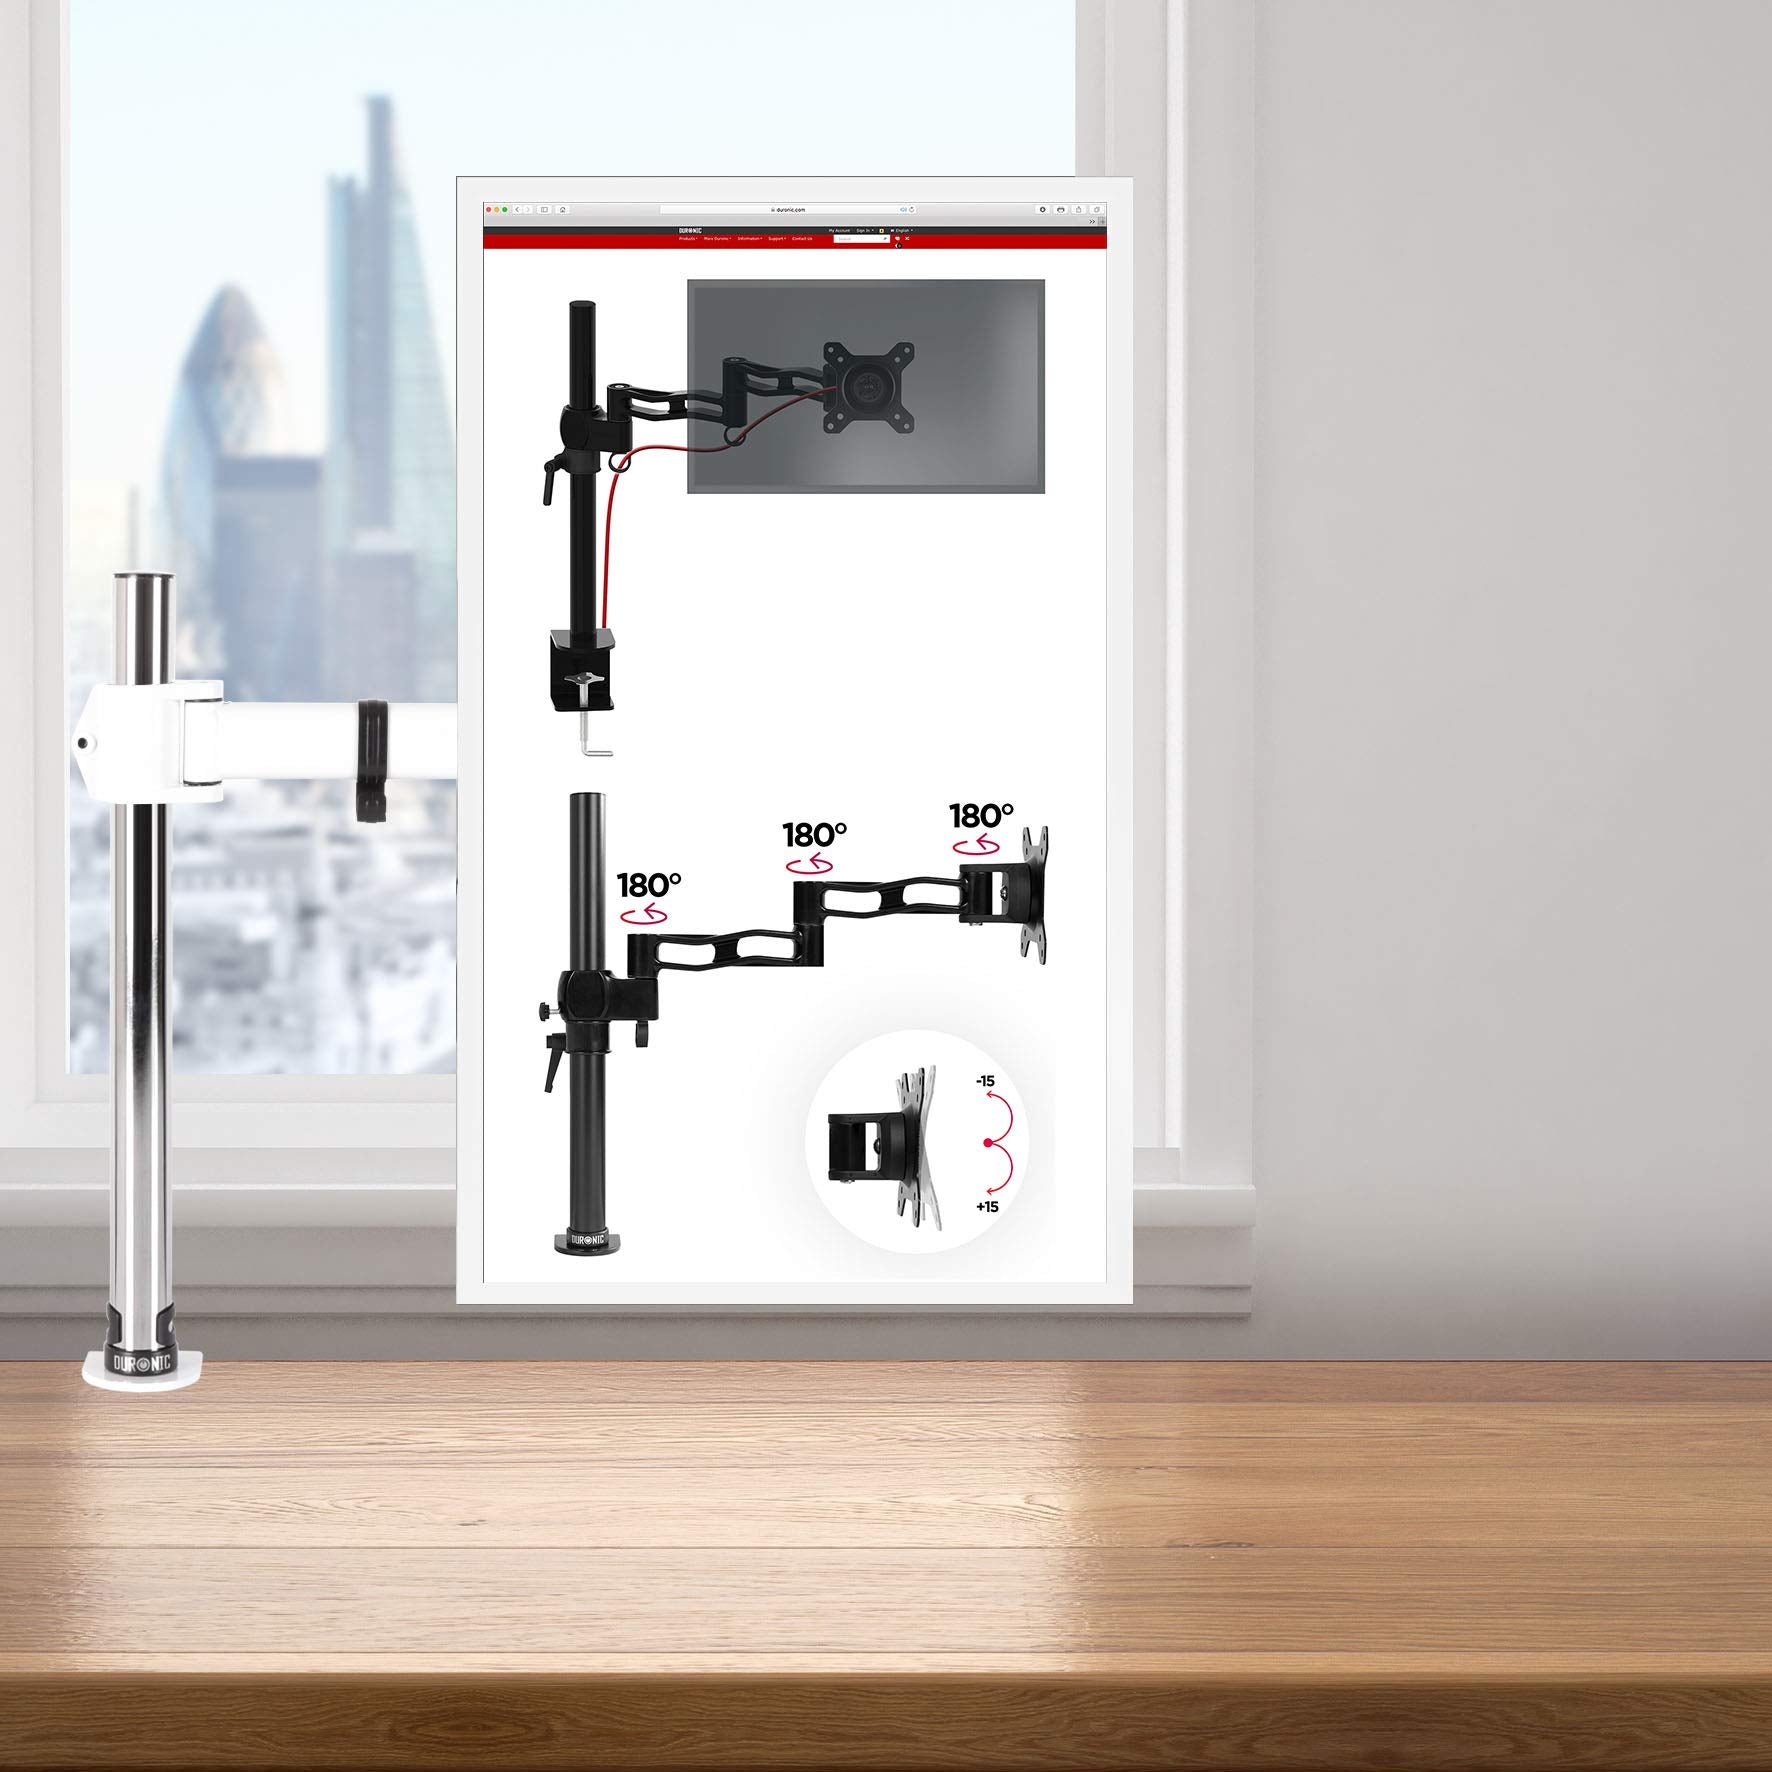 Duronic Single Monitor Arm Stand DM251X3WE | PC Desk Mount | WHITE | Height Adjustable | For One 13-27 Inch LED LCD Screen | VESA 75/100 | 8kg Capacity | Tilt -90°/+35°, Swivel 180°, Rotate 360°